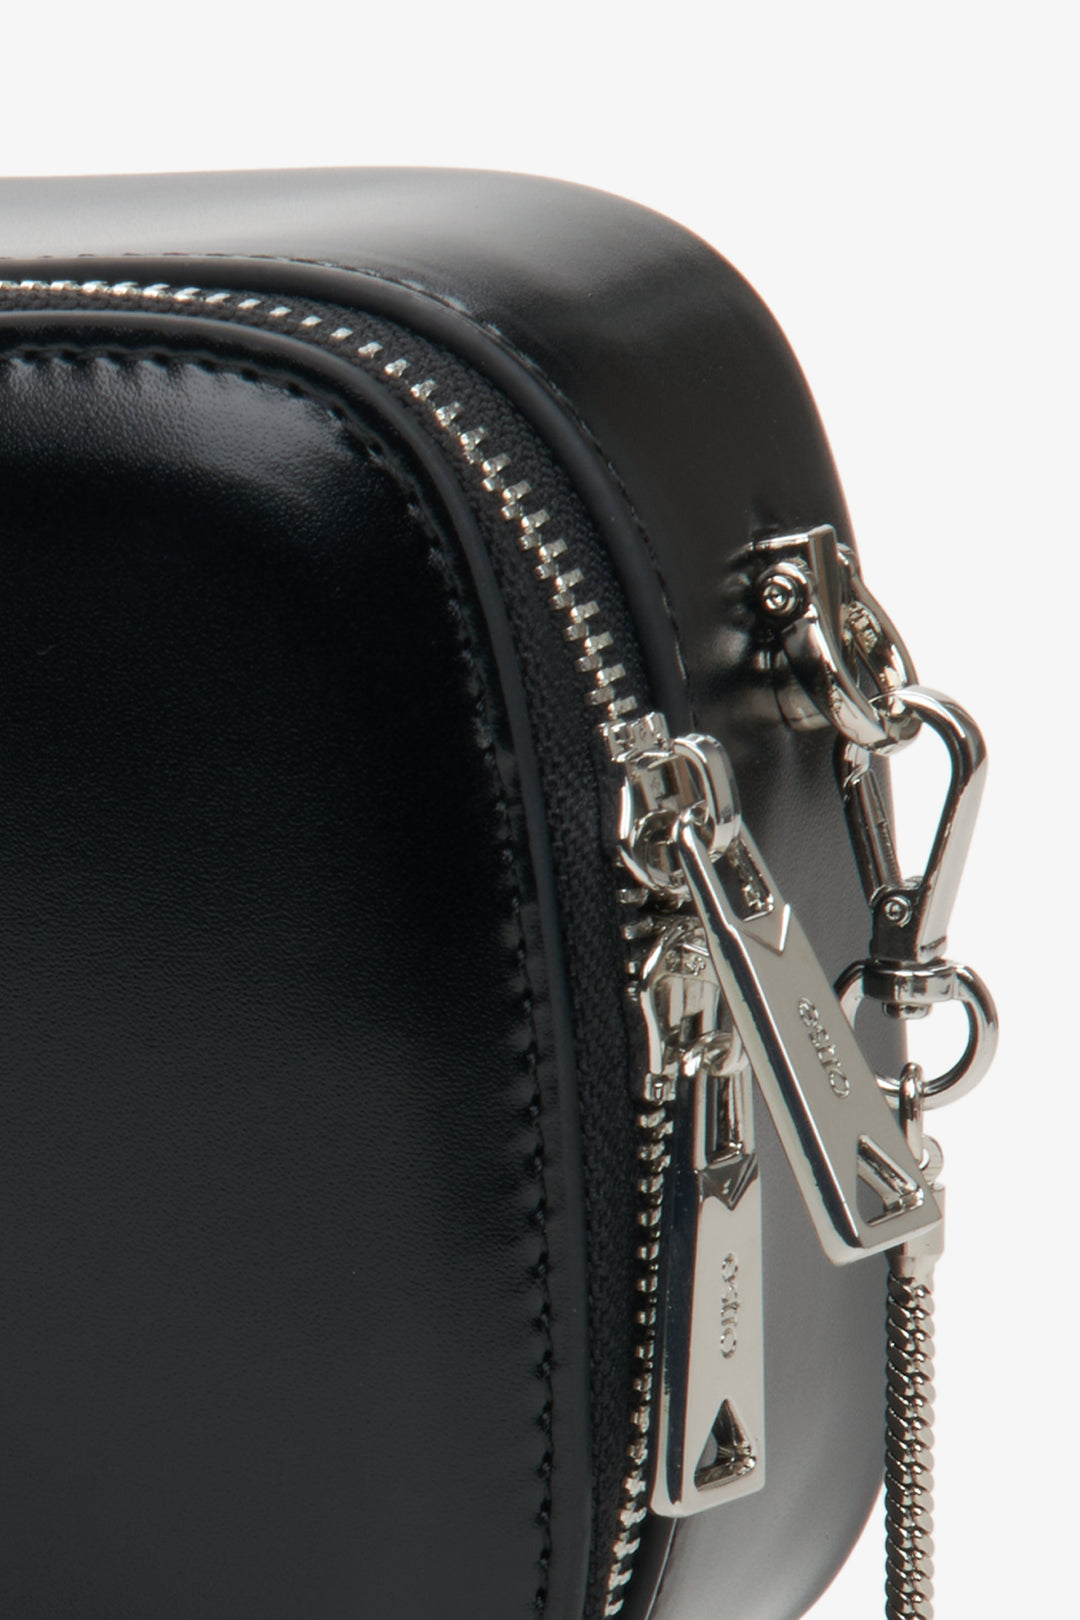 Close-up on the details of the black leather women's handbag by Estro.